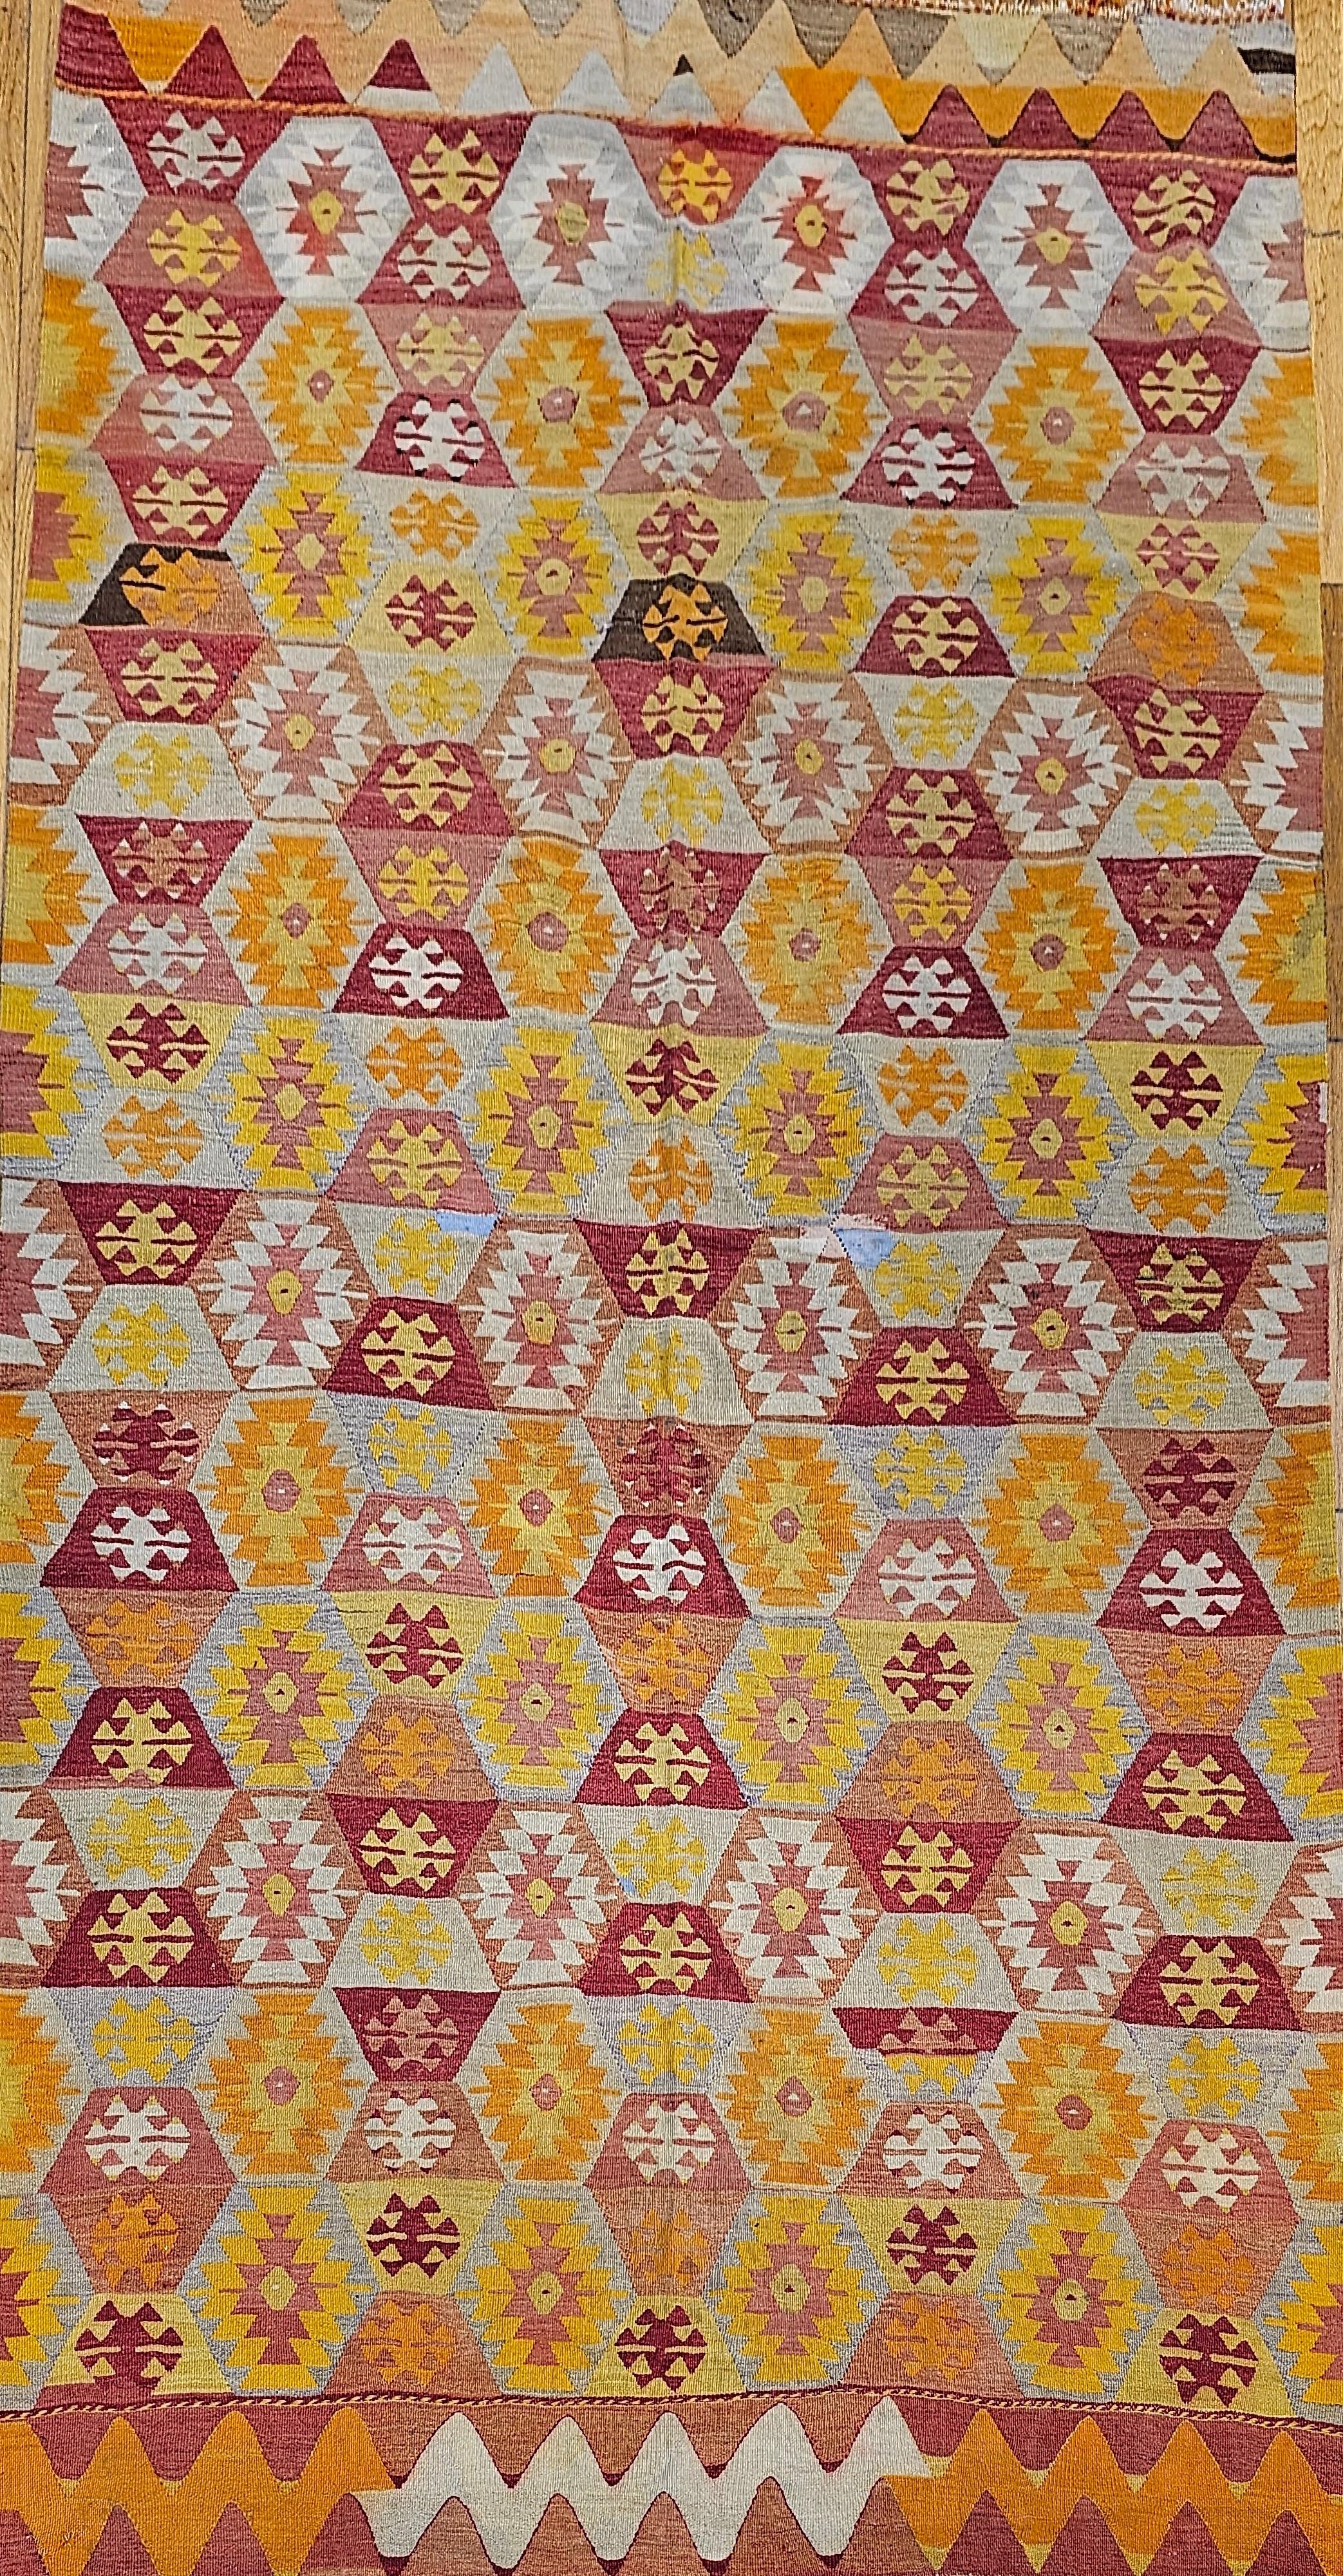 Vintage Turkish Kilim in Allover Pattern in Red, Yellow, Orange, Ivory, Gray In Good Condition For Sale In Barrington, IL